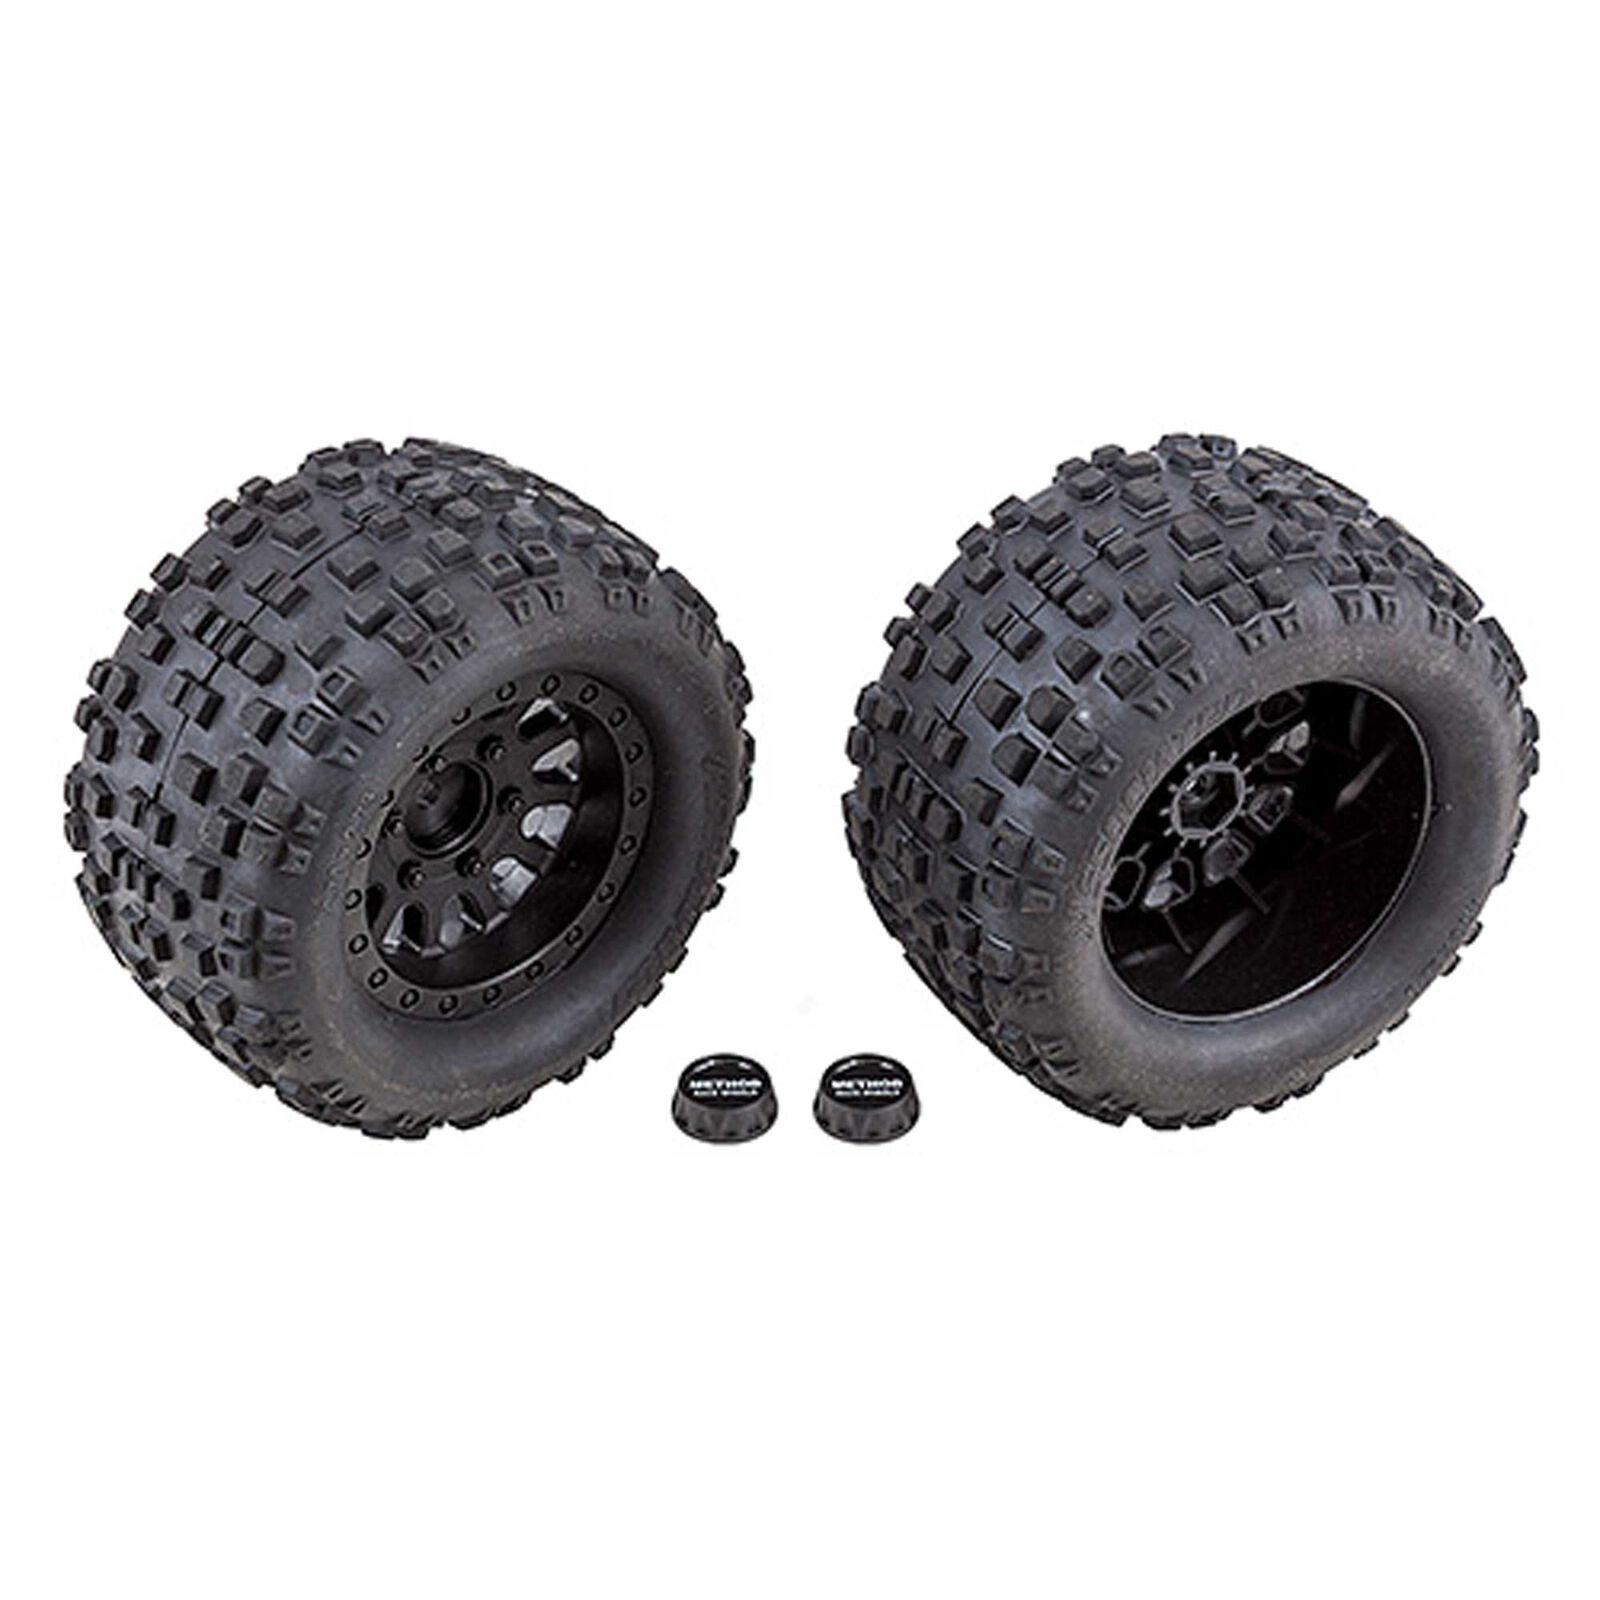 Tires and Method Wheels mounted hex: Rival MT10